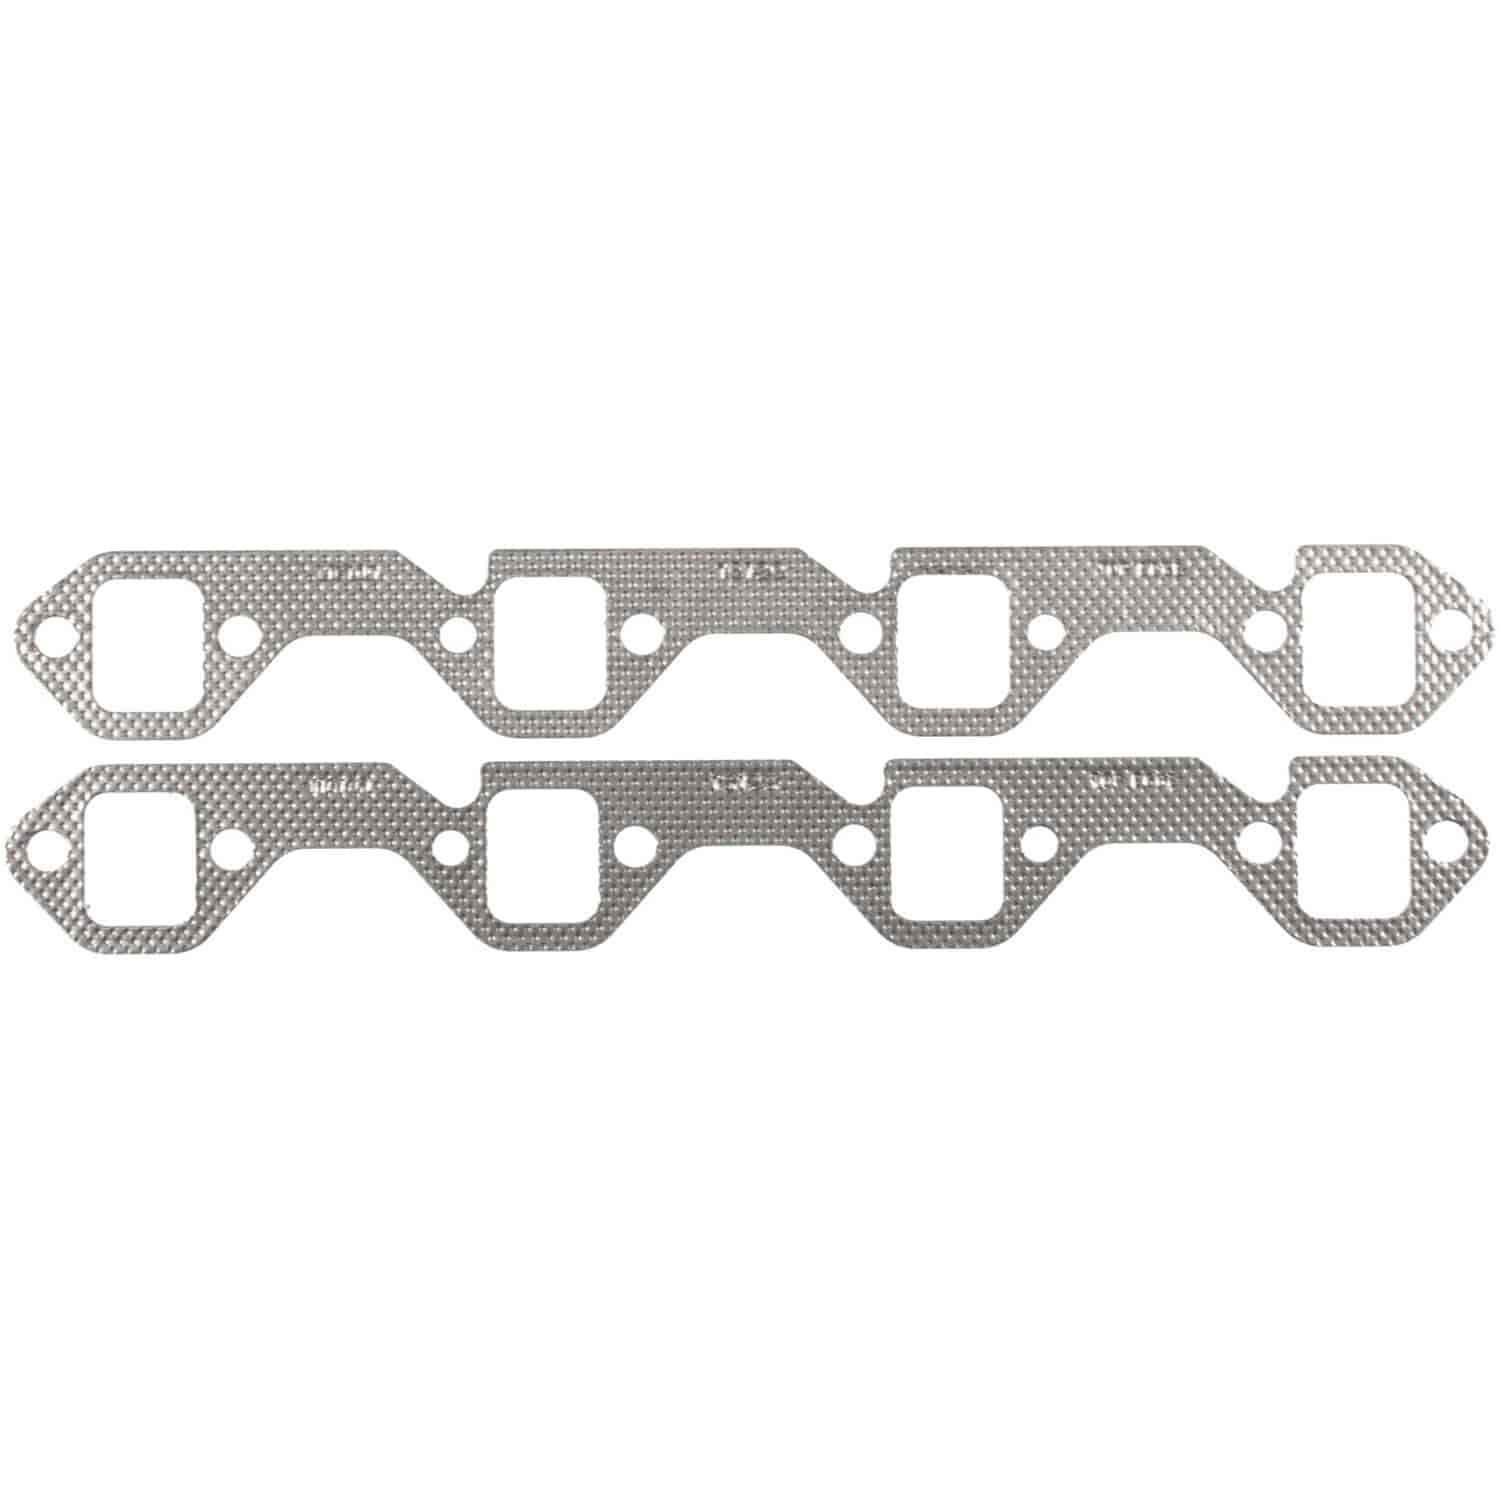 Exhaust Manifold Gasket Set 1969-1997 Small Block Ford V8 302/351W (5.0/5.8L)